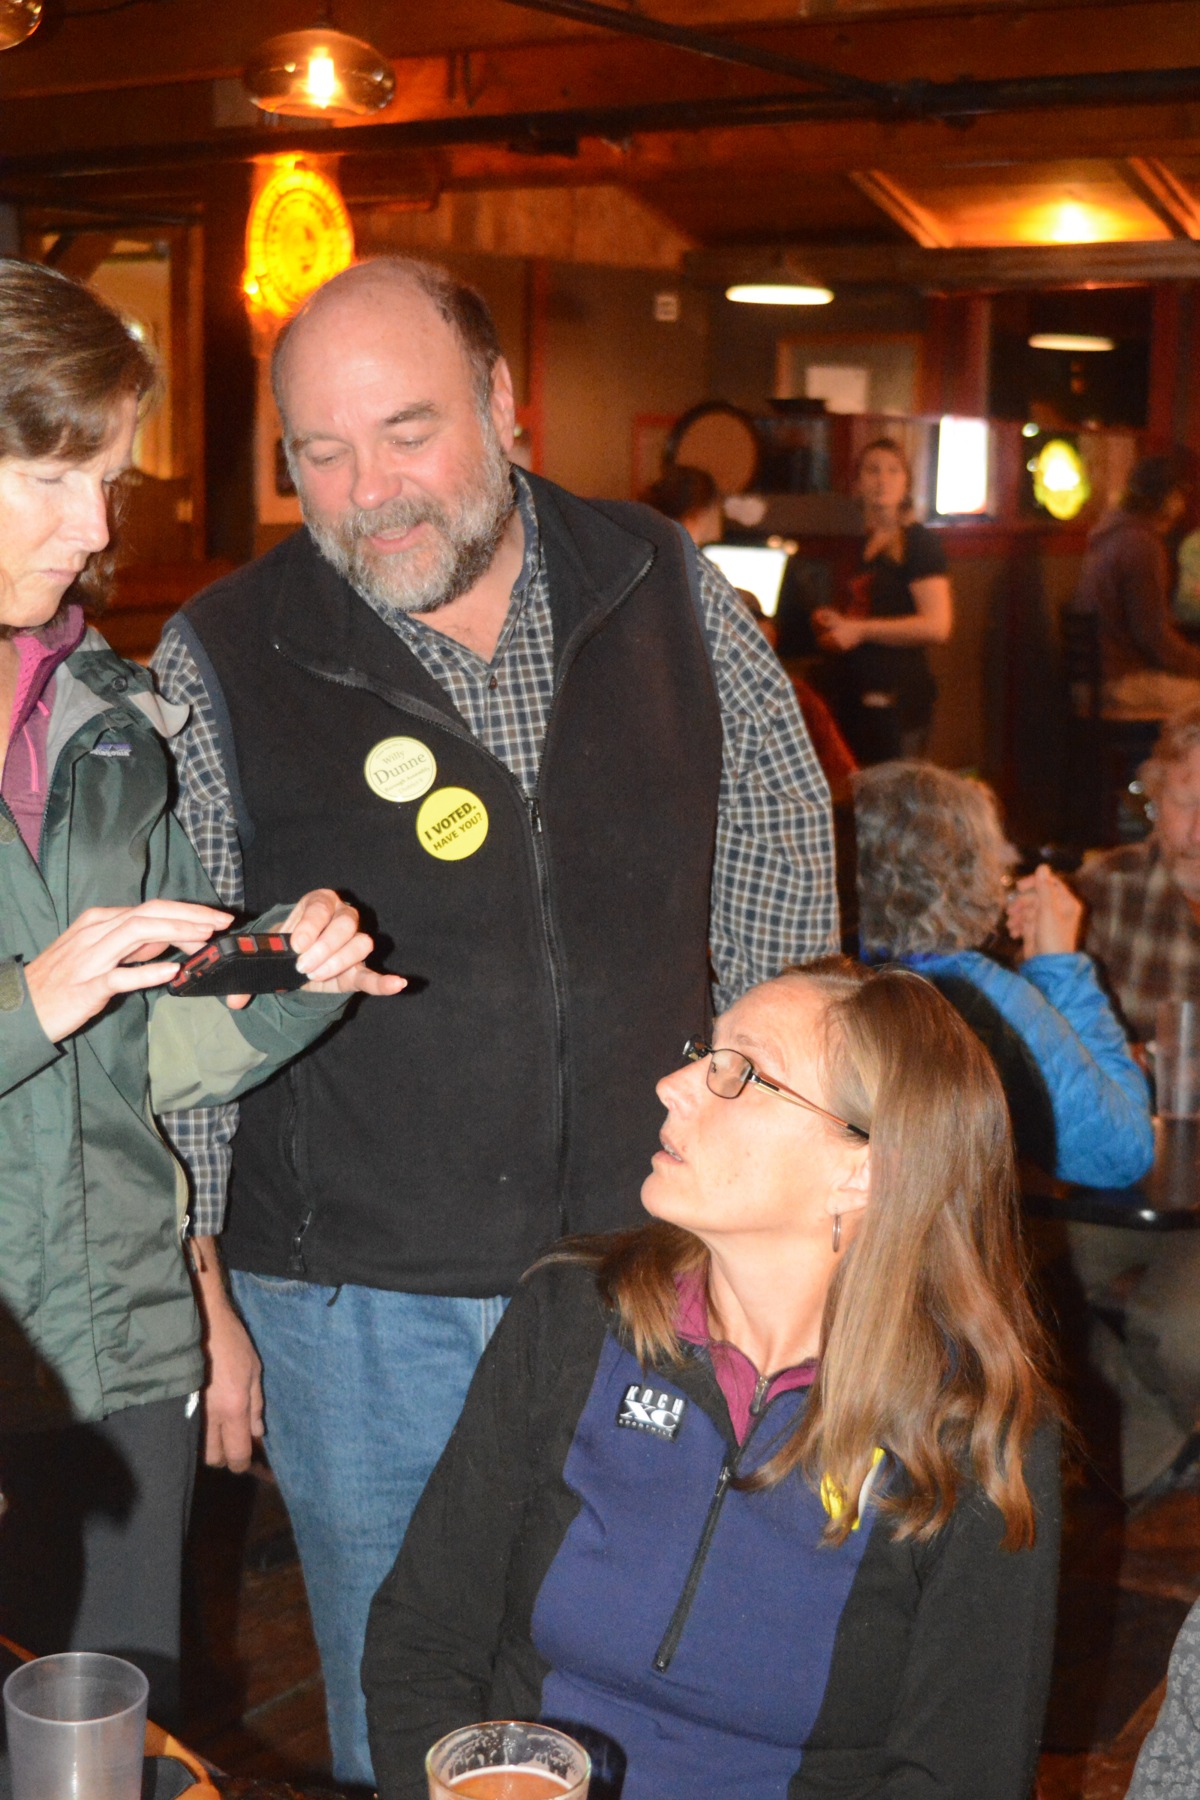 Sue Mauger, left, shows Willy Dunne, center, and Donna Aderhold election results on her smart phone at an election party Tuesday night at Alice's Champagne Palace. Dunne is the apparent winner in the race for Kenai Peninsula Borough Assembly while Aderhold took first place in the two-seat Homer City Council election.-Photo by Michael Armstrong, Homer News